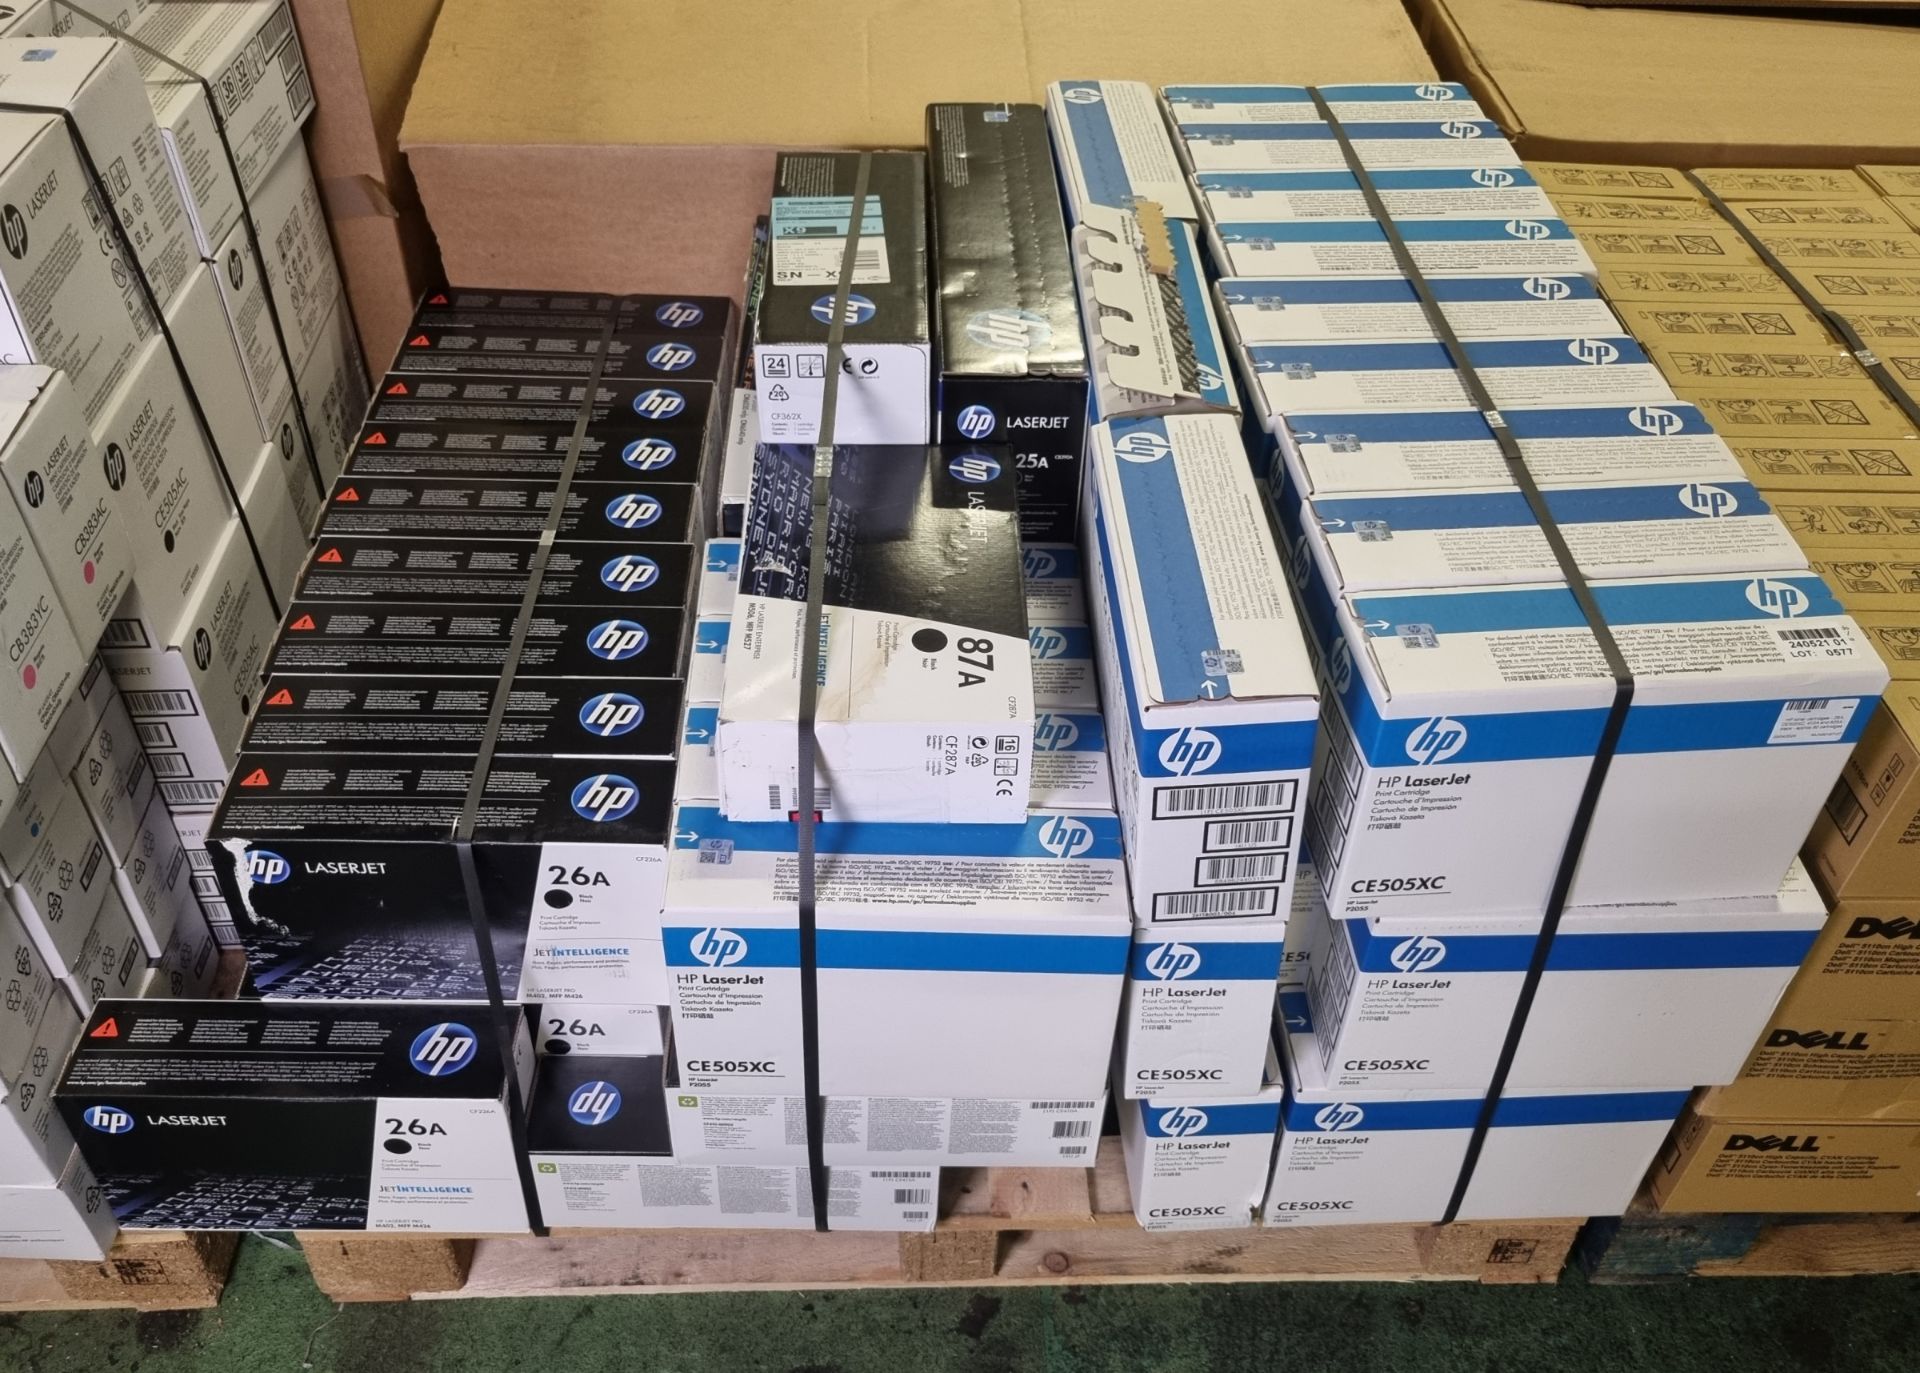 HP toner cartridges - 26A, CE505XC, 410A and 825A - black - approx. 80 cartridges - Image 2 of 6